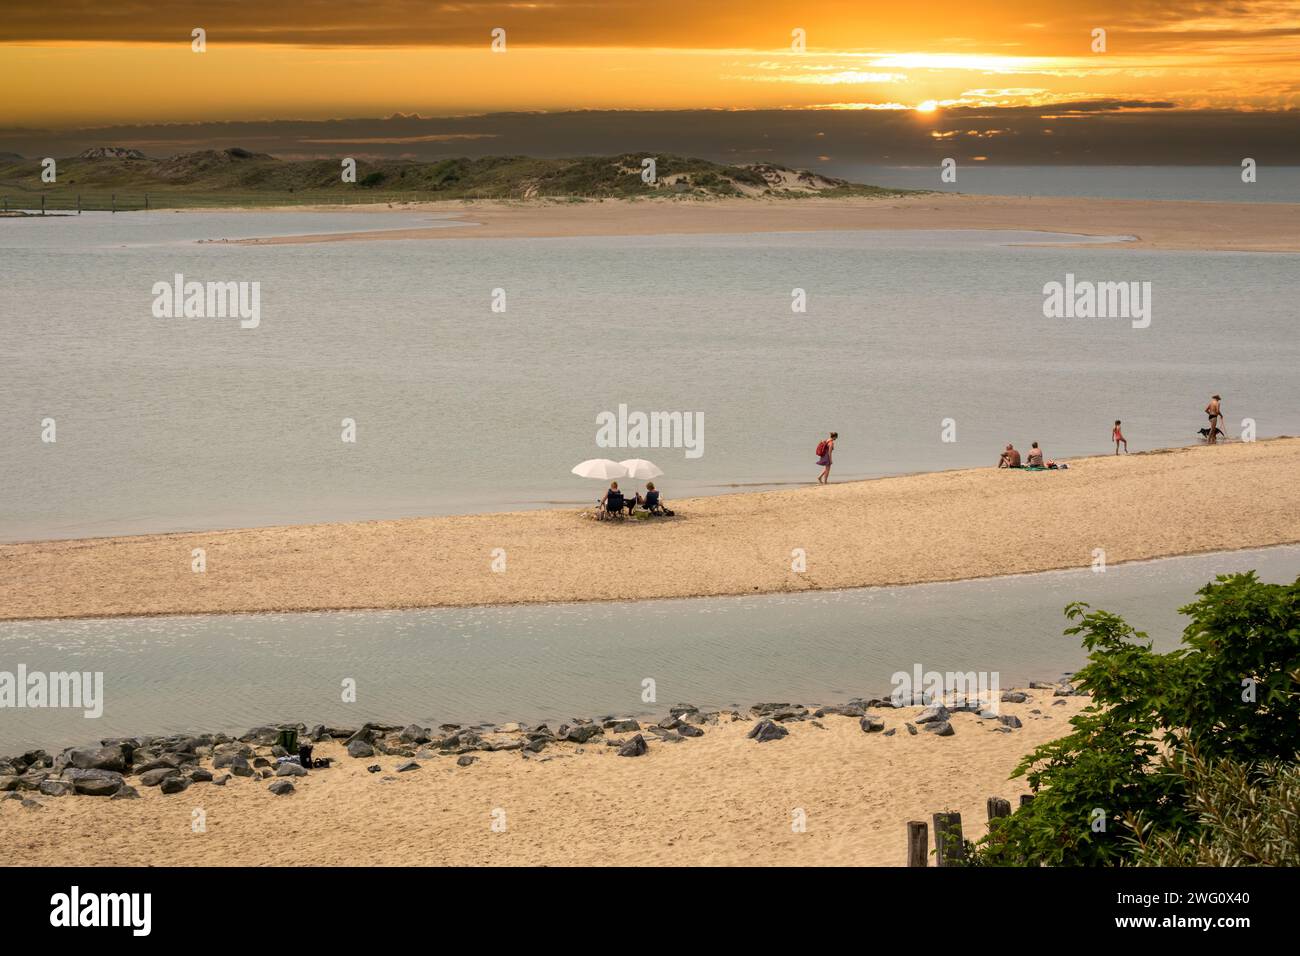 People on beach of tidal inlet of The Zwin nature reserve at North Sea coast at sunset, at border between Belgium and the Netherlands Stock Photo